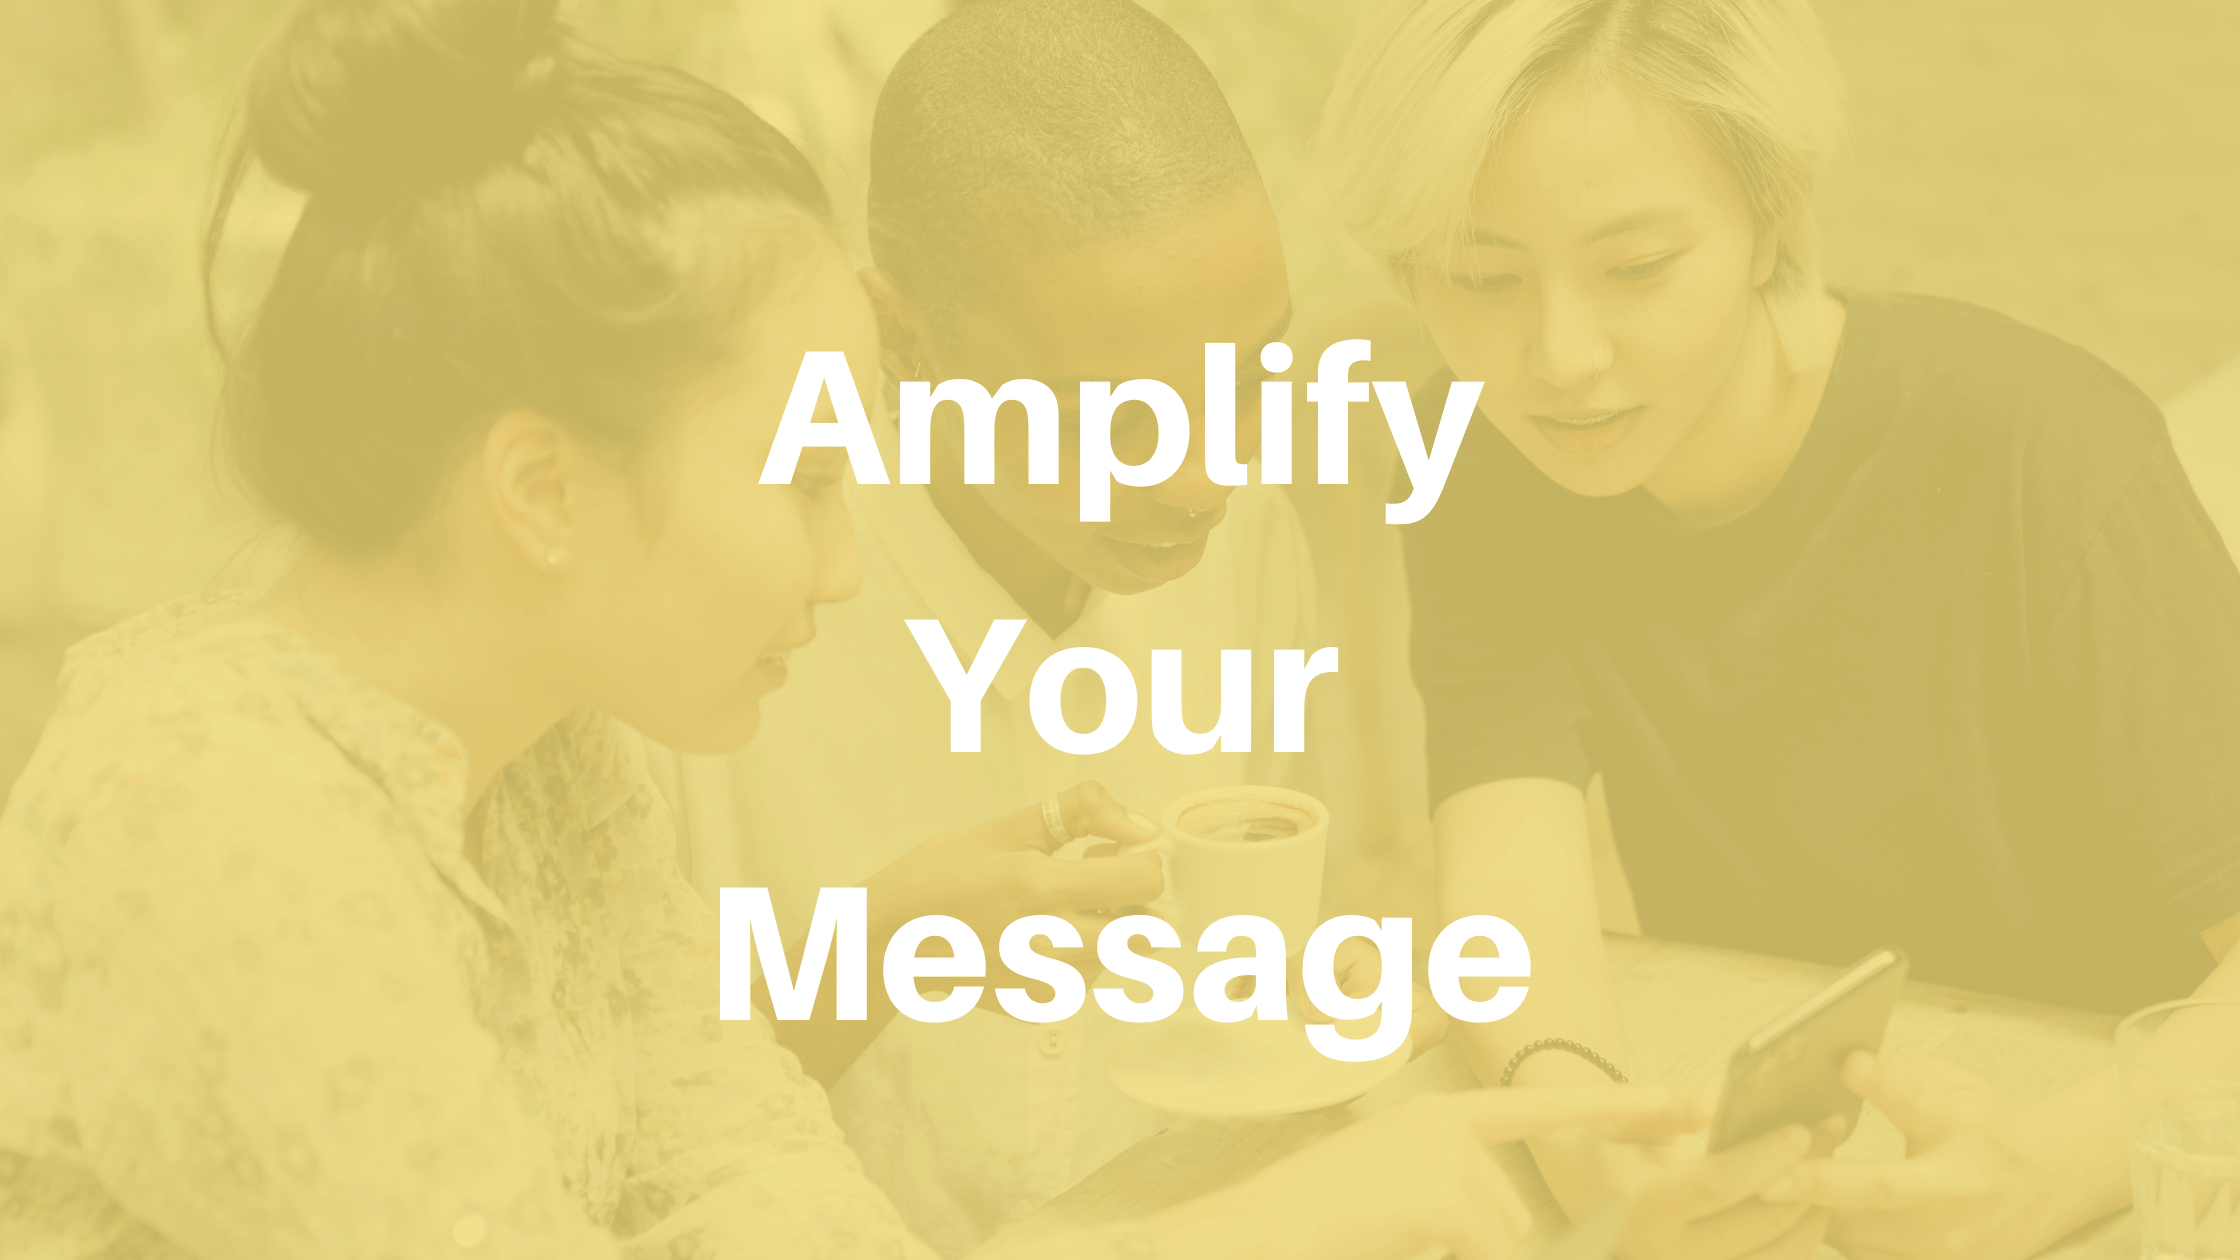 Amplify your message